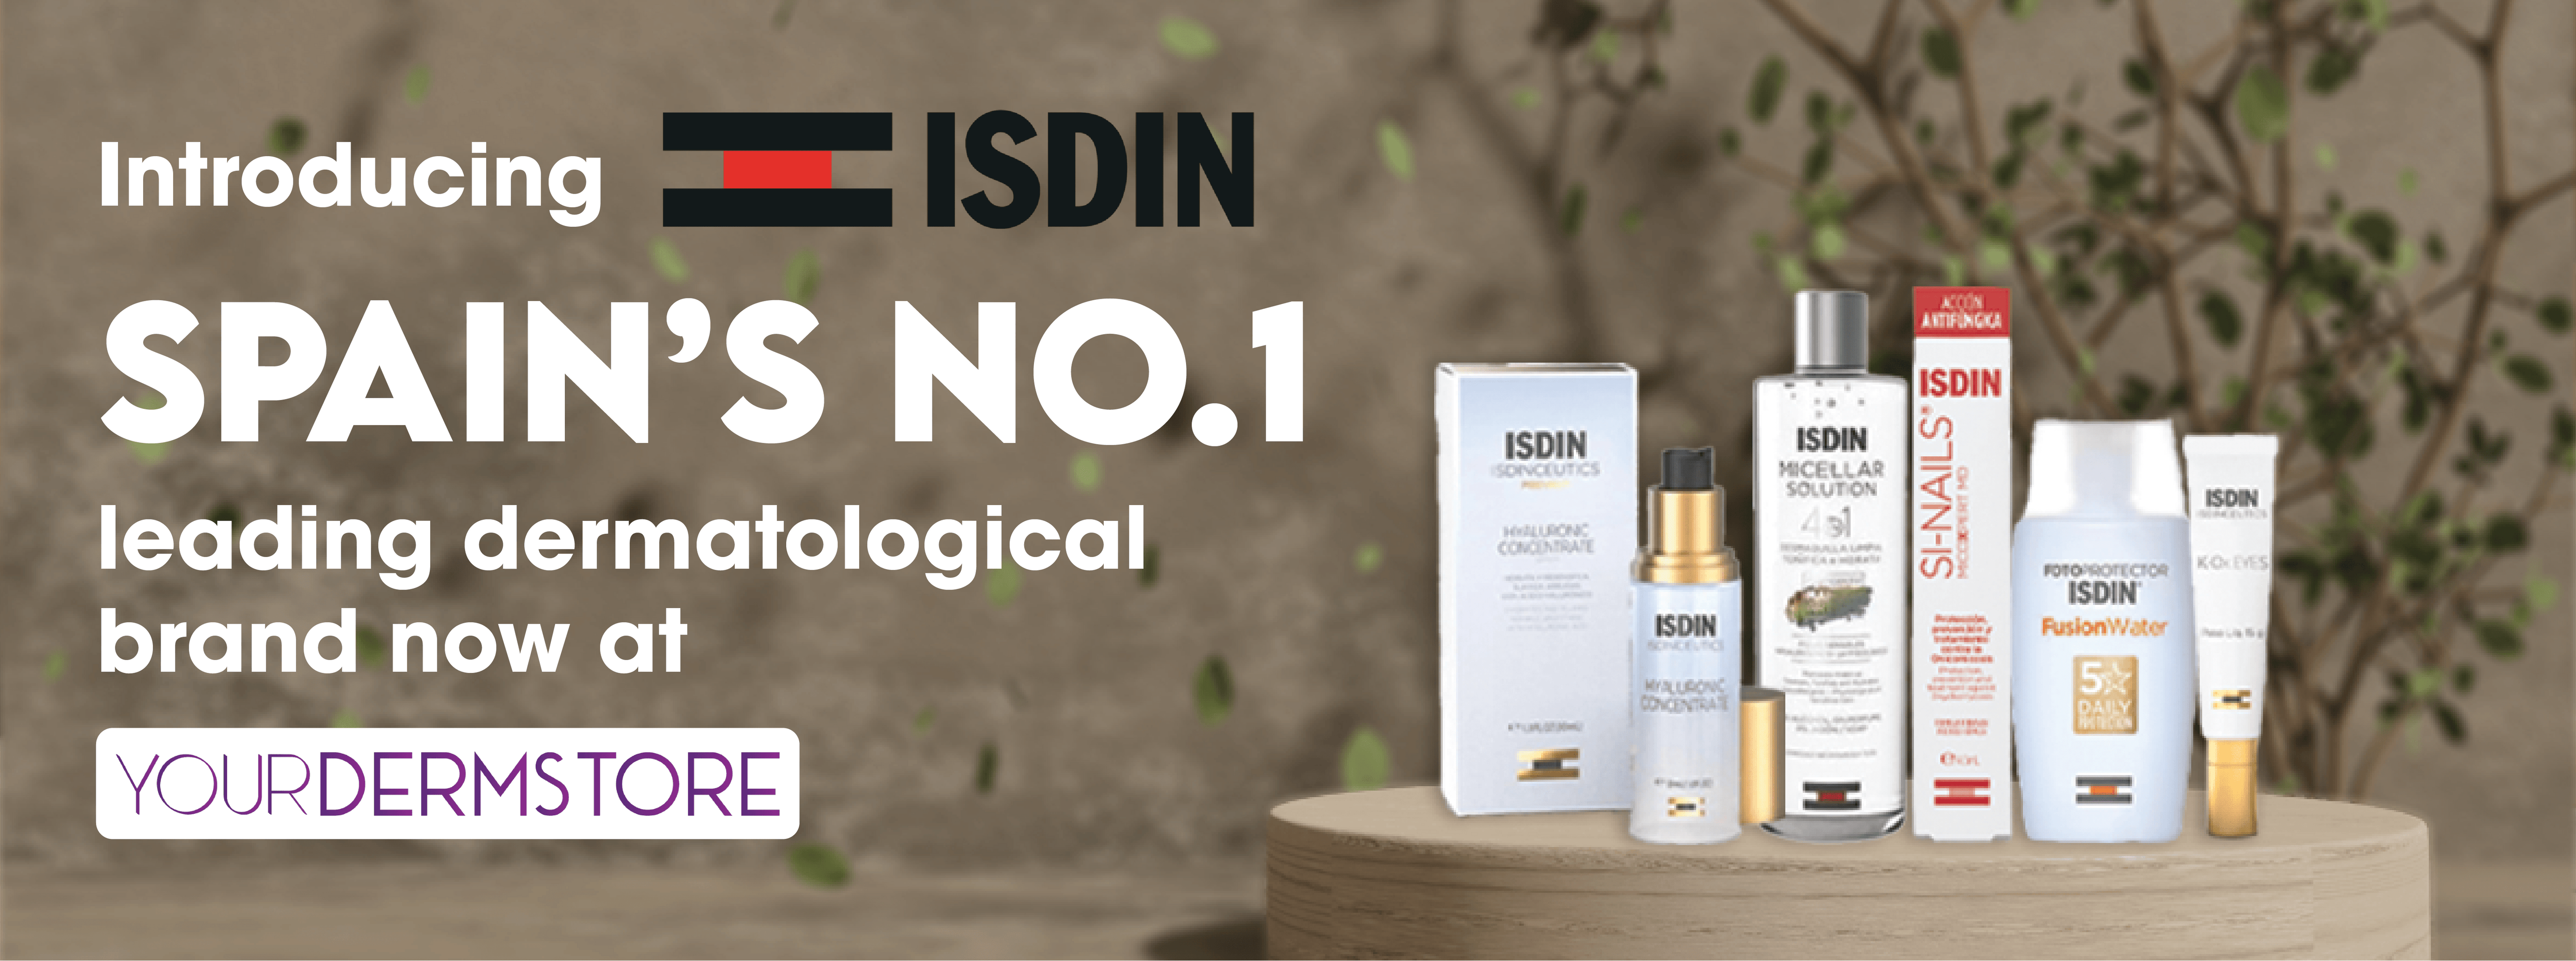 "Experience the science of skincare excellence with ISDIN's innovative dermatological solutions."